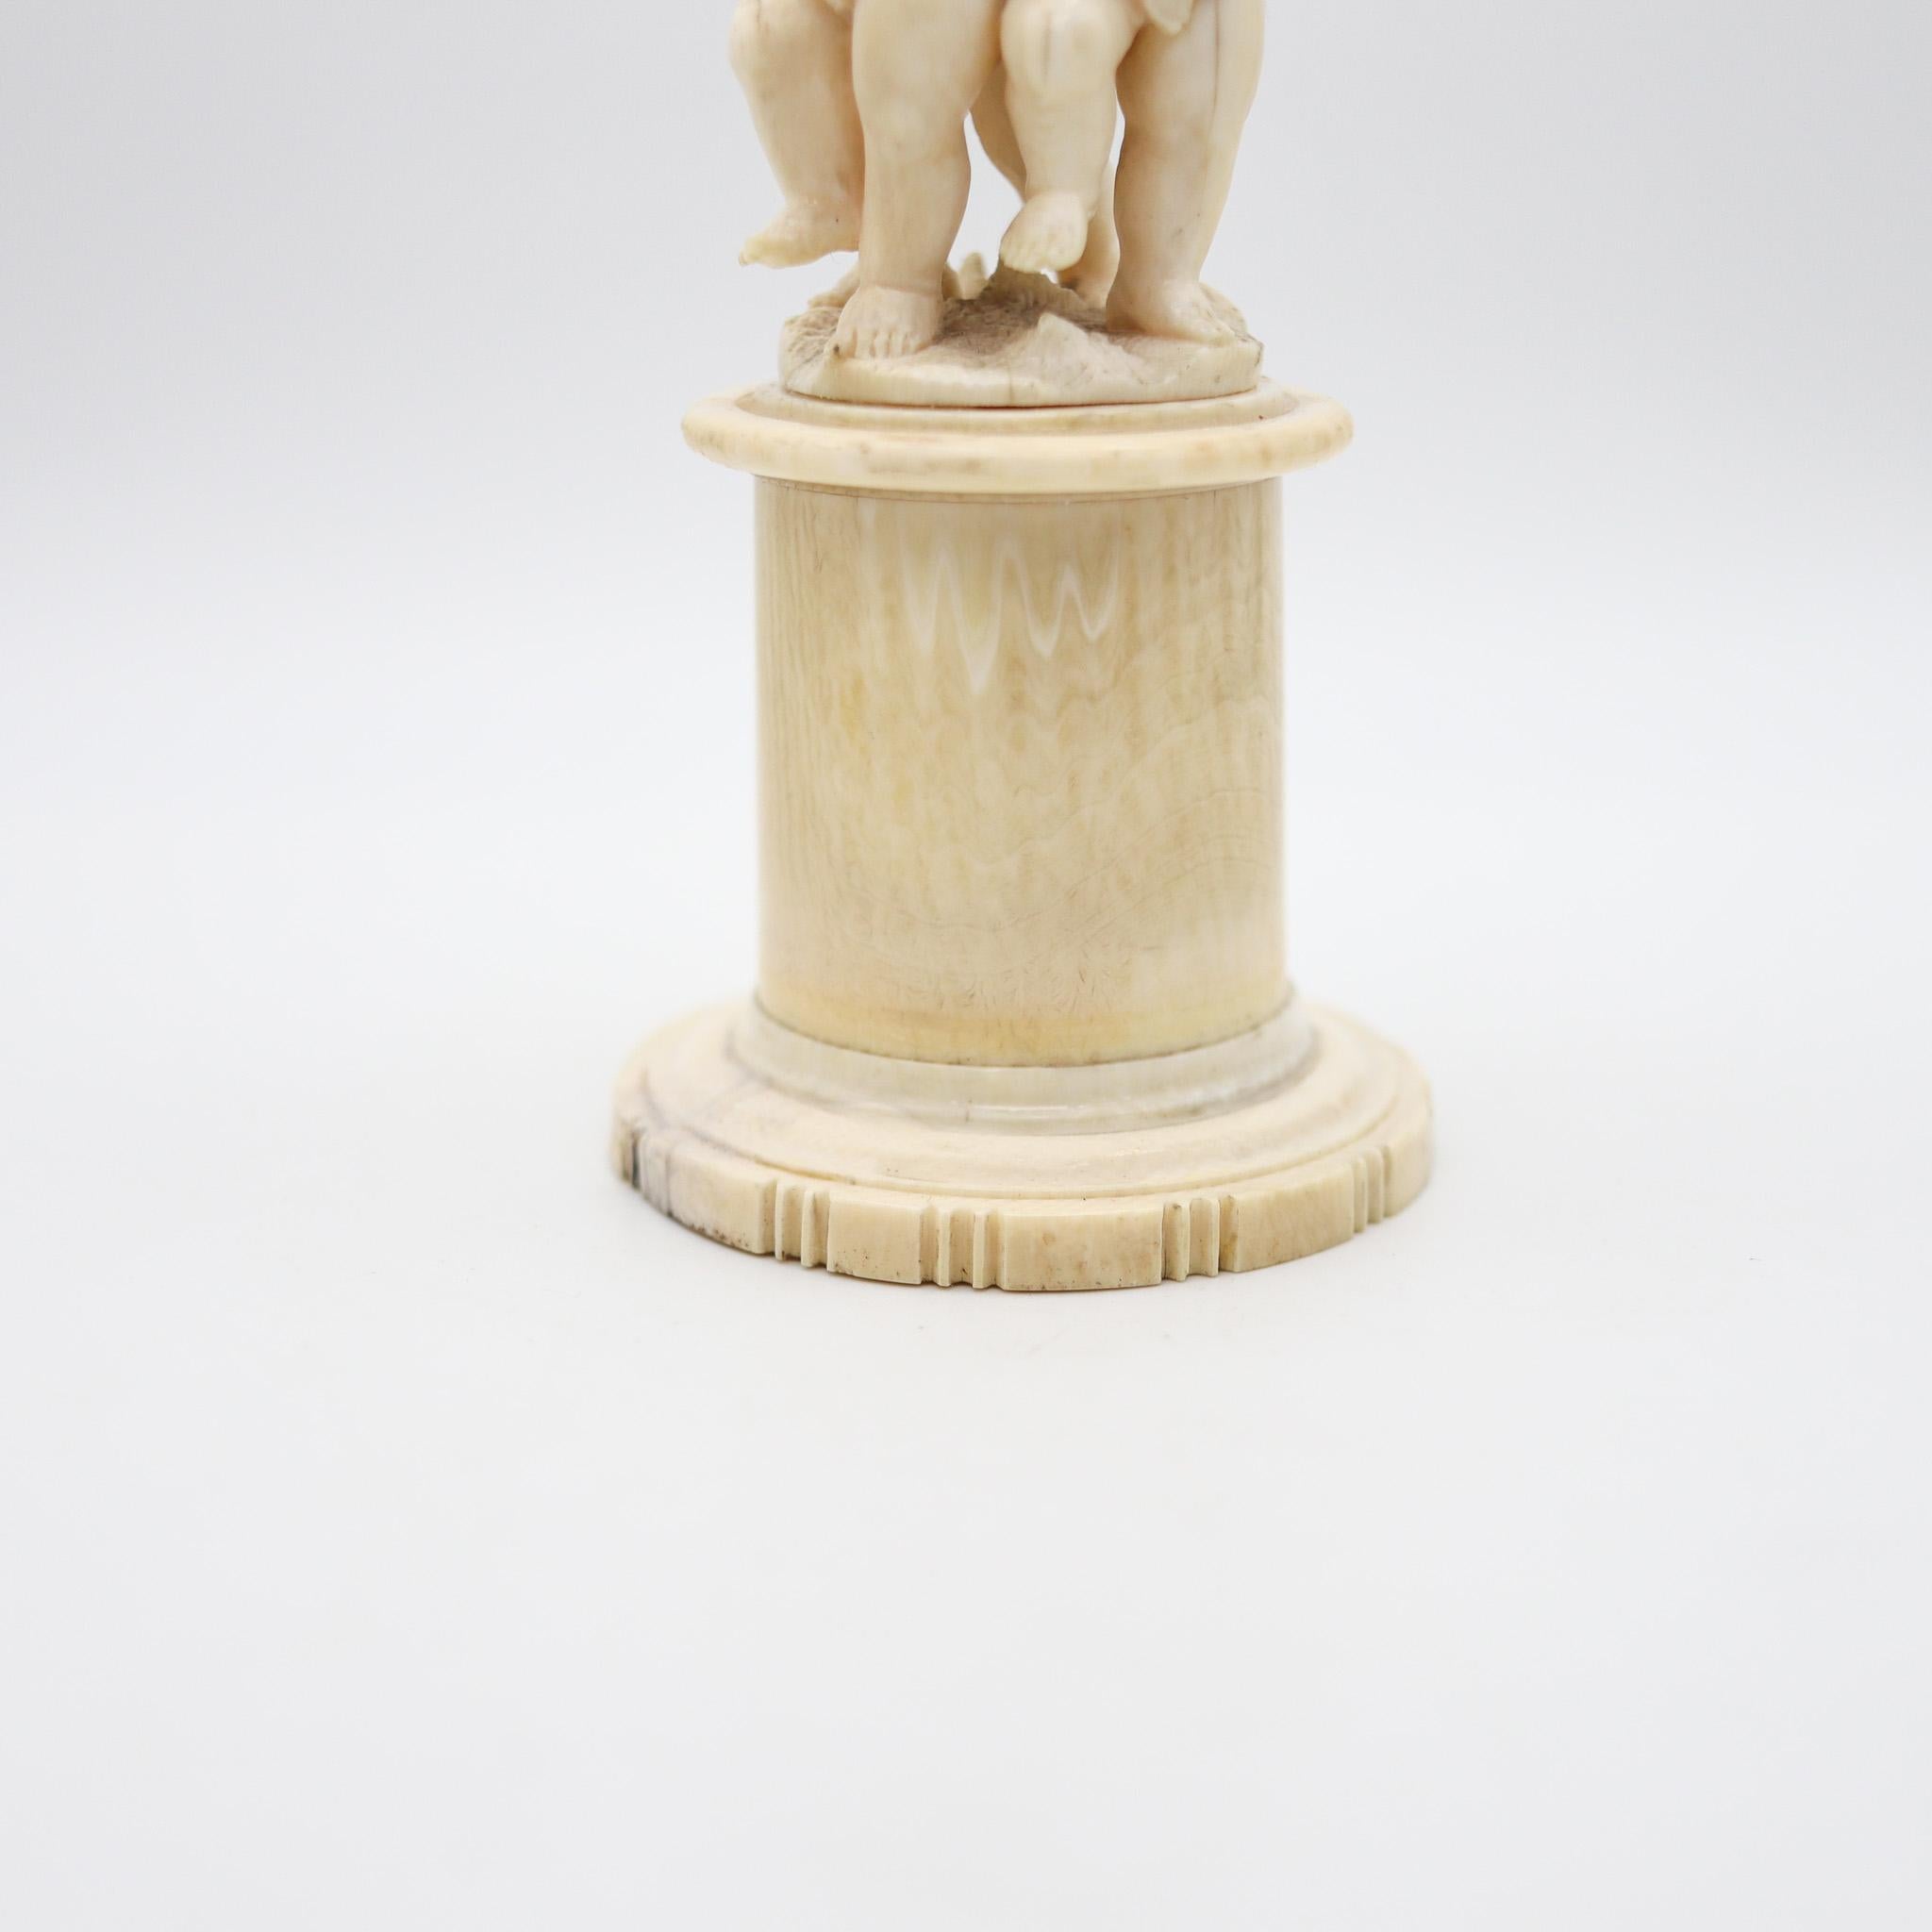 Italian 1850 Neo Classic Carved Desk Trophy Box With The Triumph of Bacchus In Excellent Condition For Sale In Miami, FL